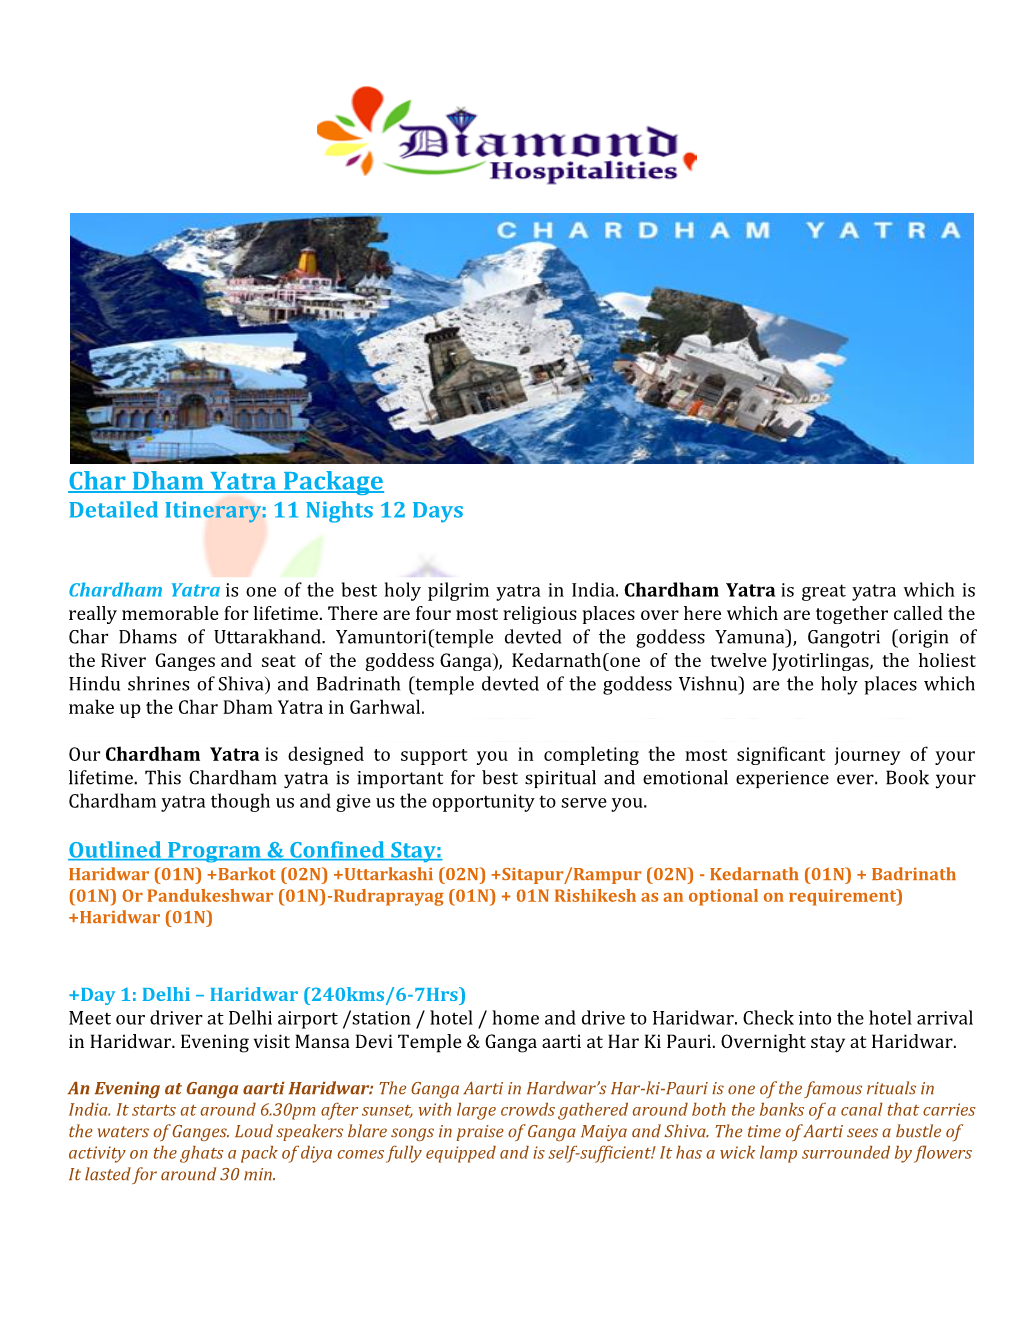 Char Dham Yatra Package Detailed Itinerary: 11 Nights 12 Days